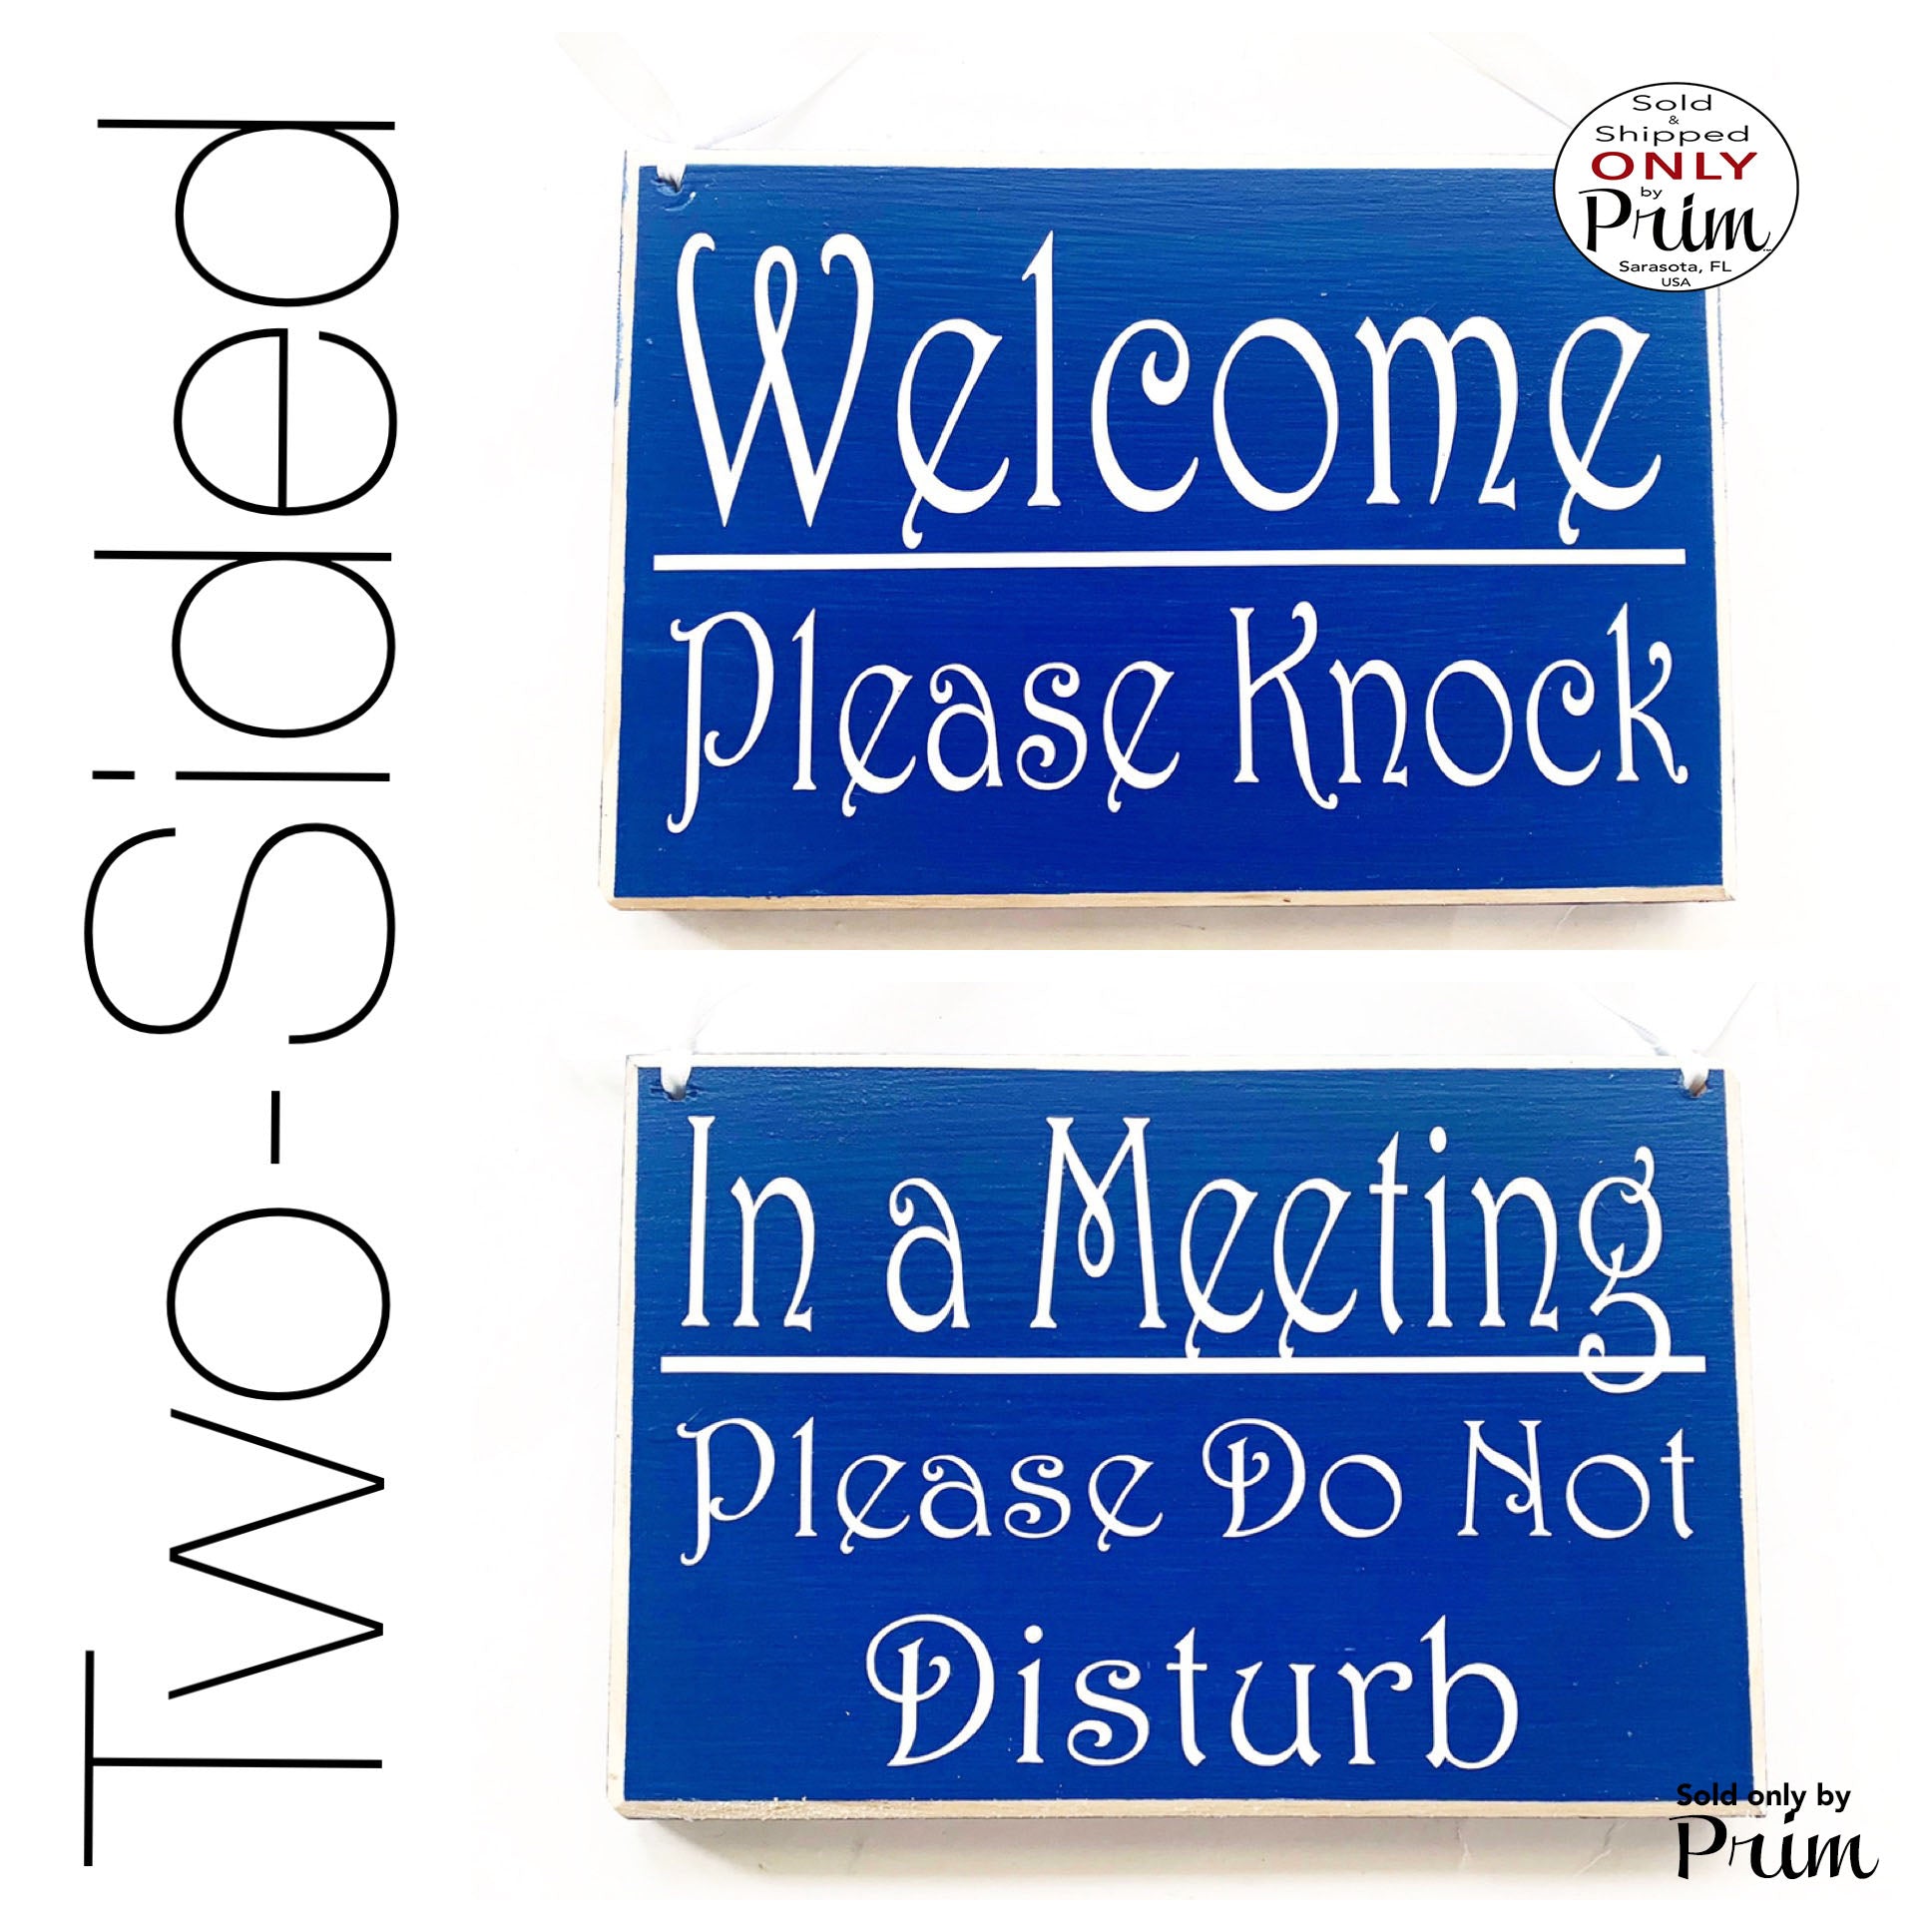 Two Sided 8x6 In a Meeting Please Do Not Disturb Welcome Please Knock Custom Wood Sign Open Closed Session Spa Salon Office Door Hanger